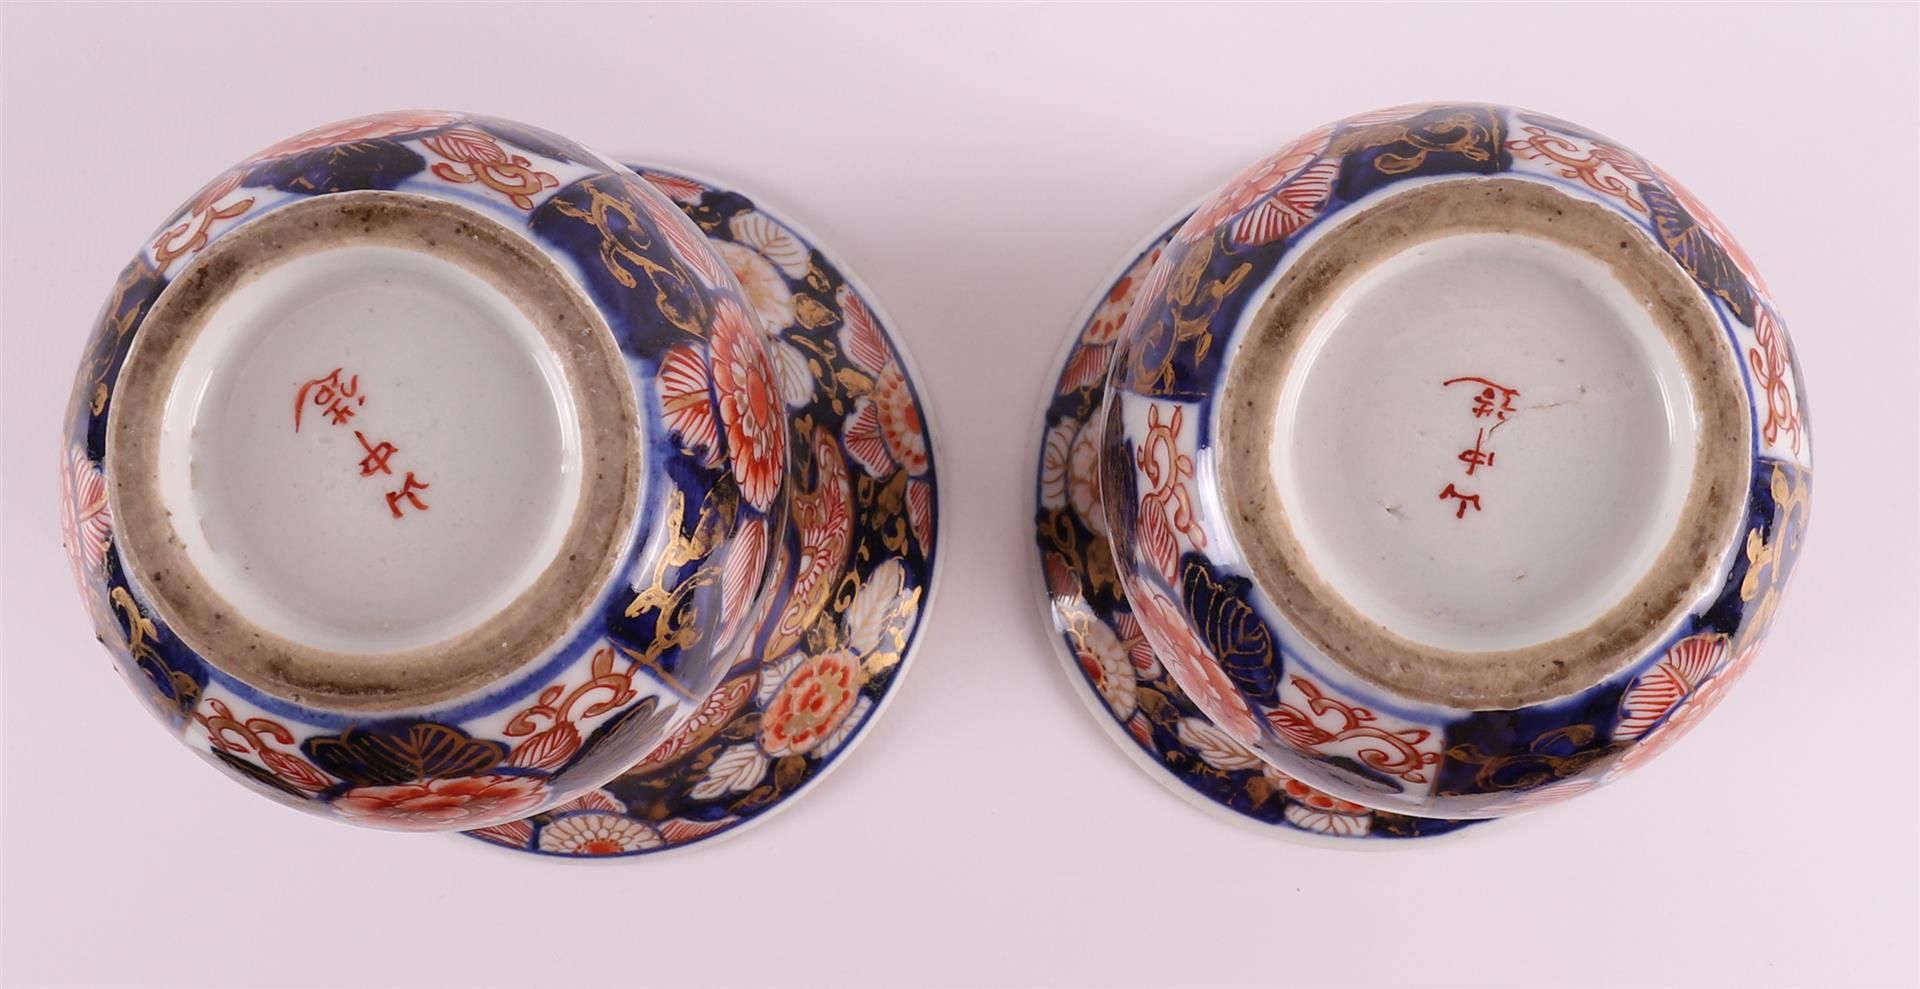 A five-piece porcelain Imari cabinet set, consisting of: three lidded vases and two vases with - Image 17 of 17